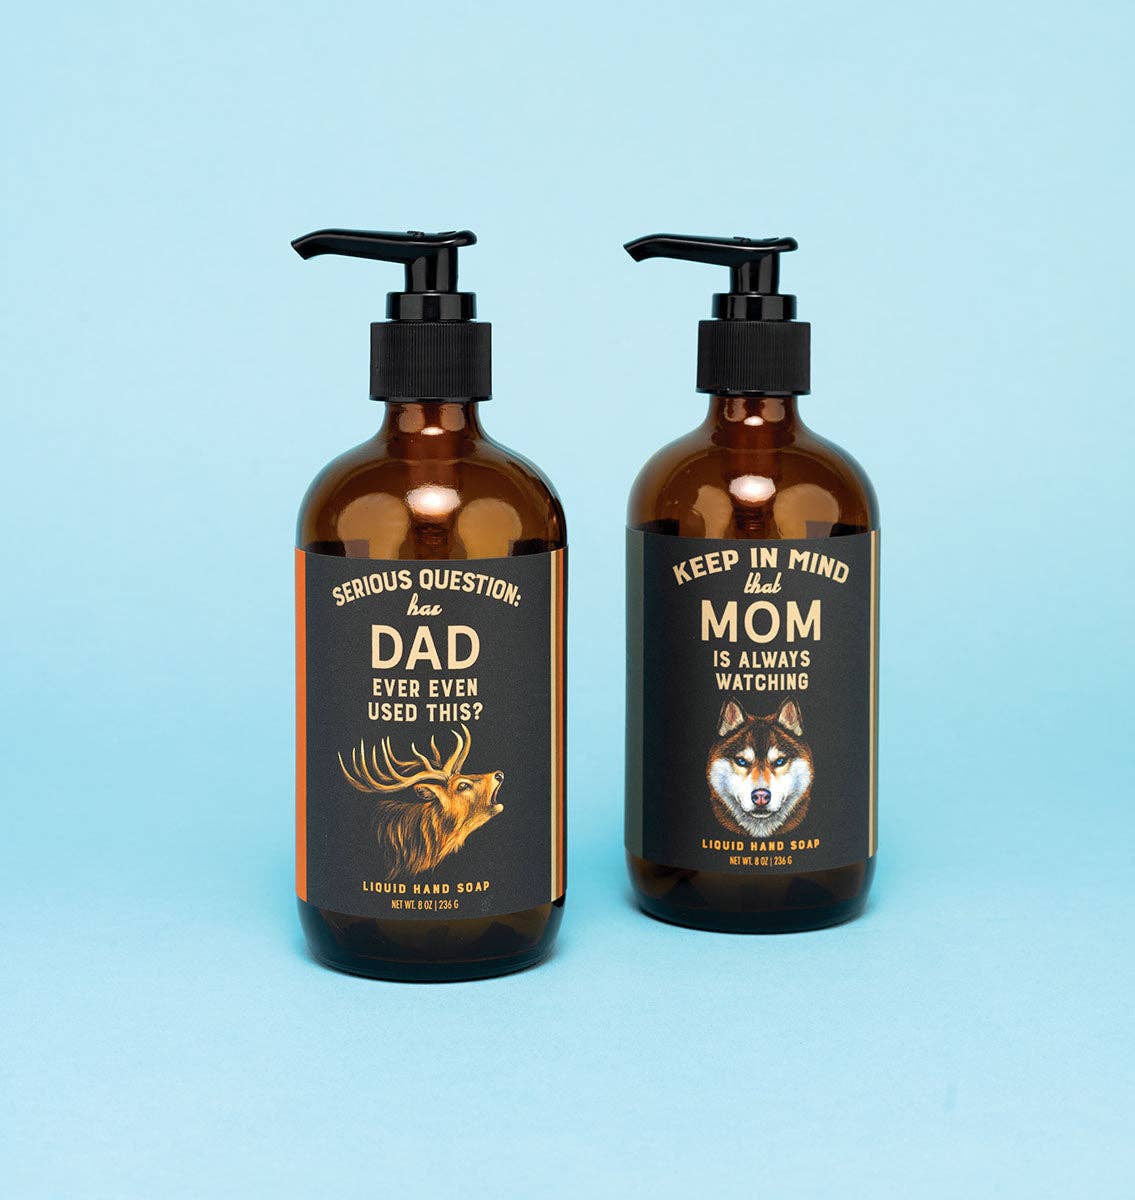 Has Dad Ever Even Used This? Liquid Hand Soap | Funny Soap